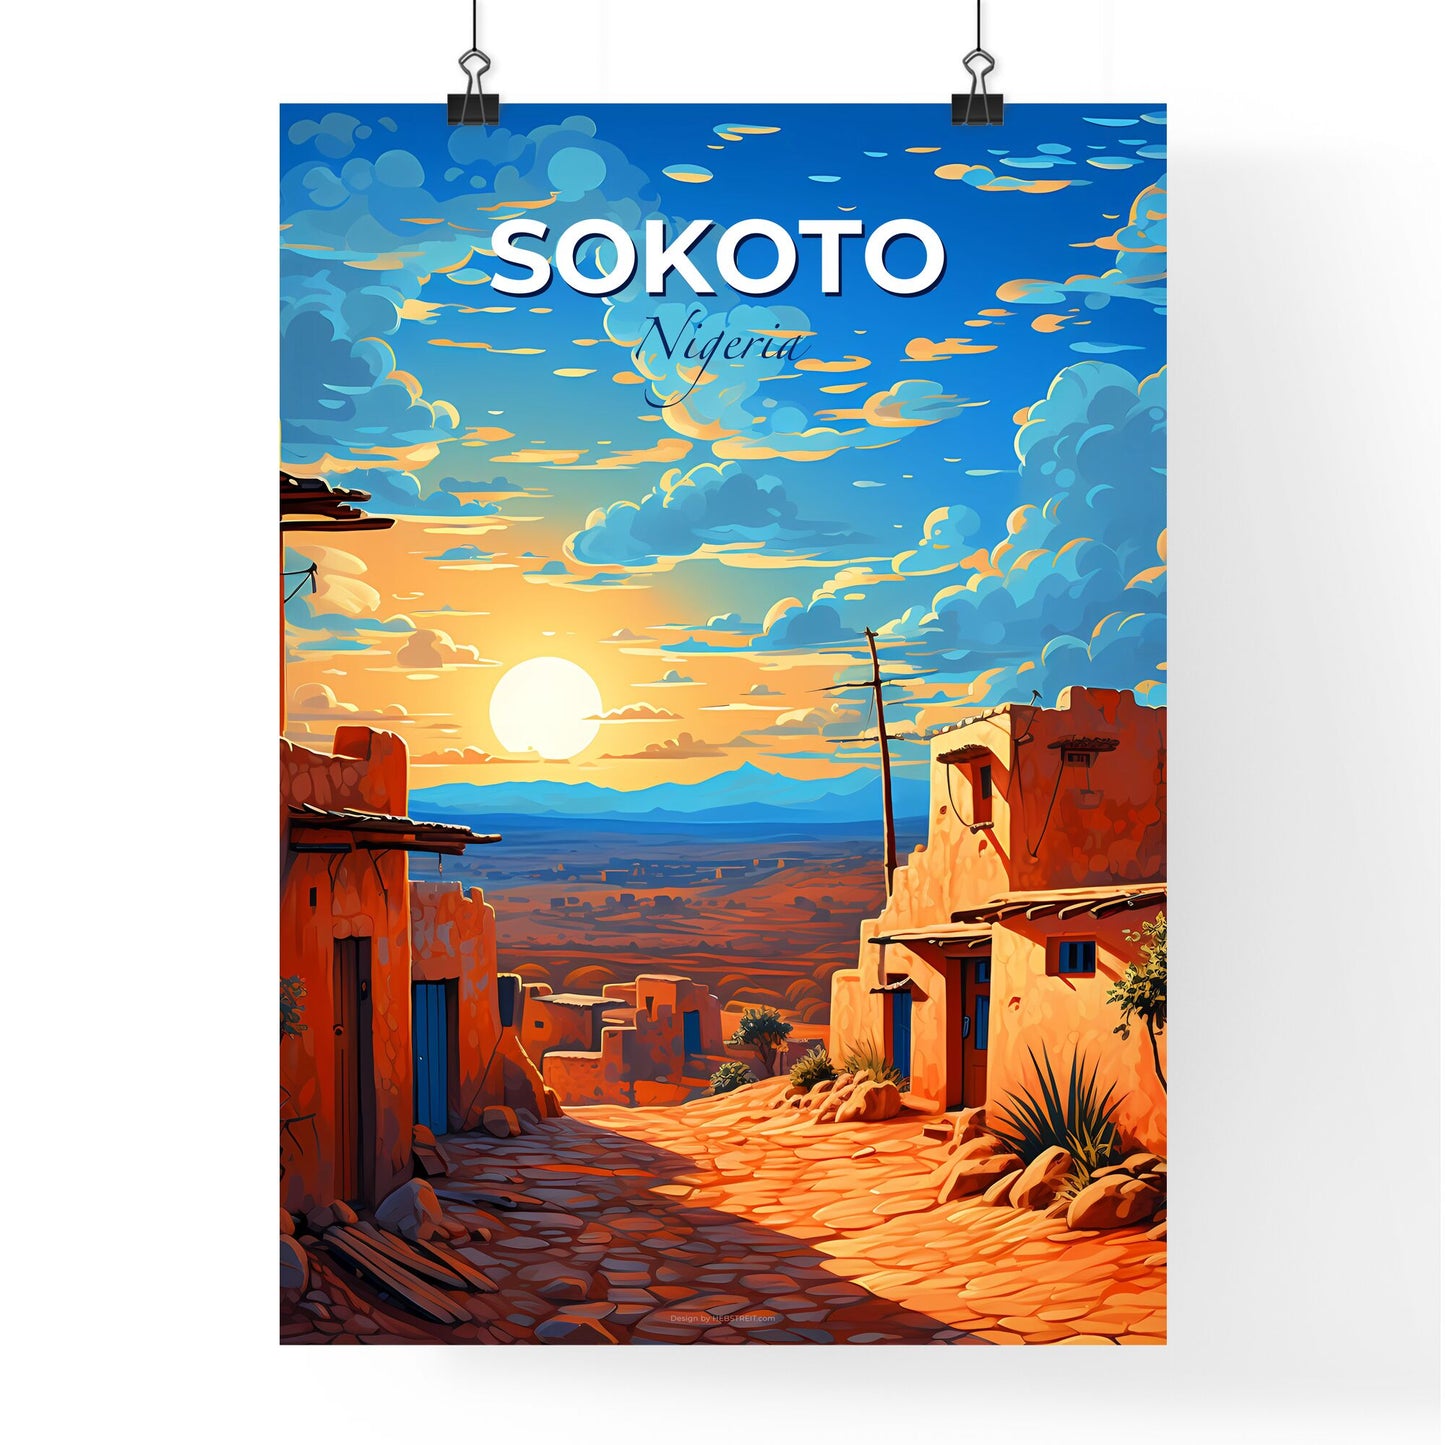 Vibrant Painting of Village Skyline in Sokoto Nigeria with a Focus on Art Default Title